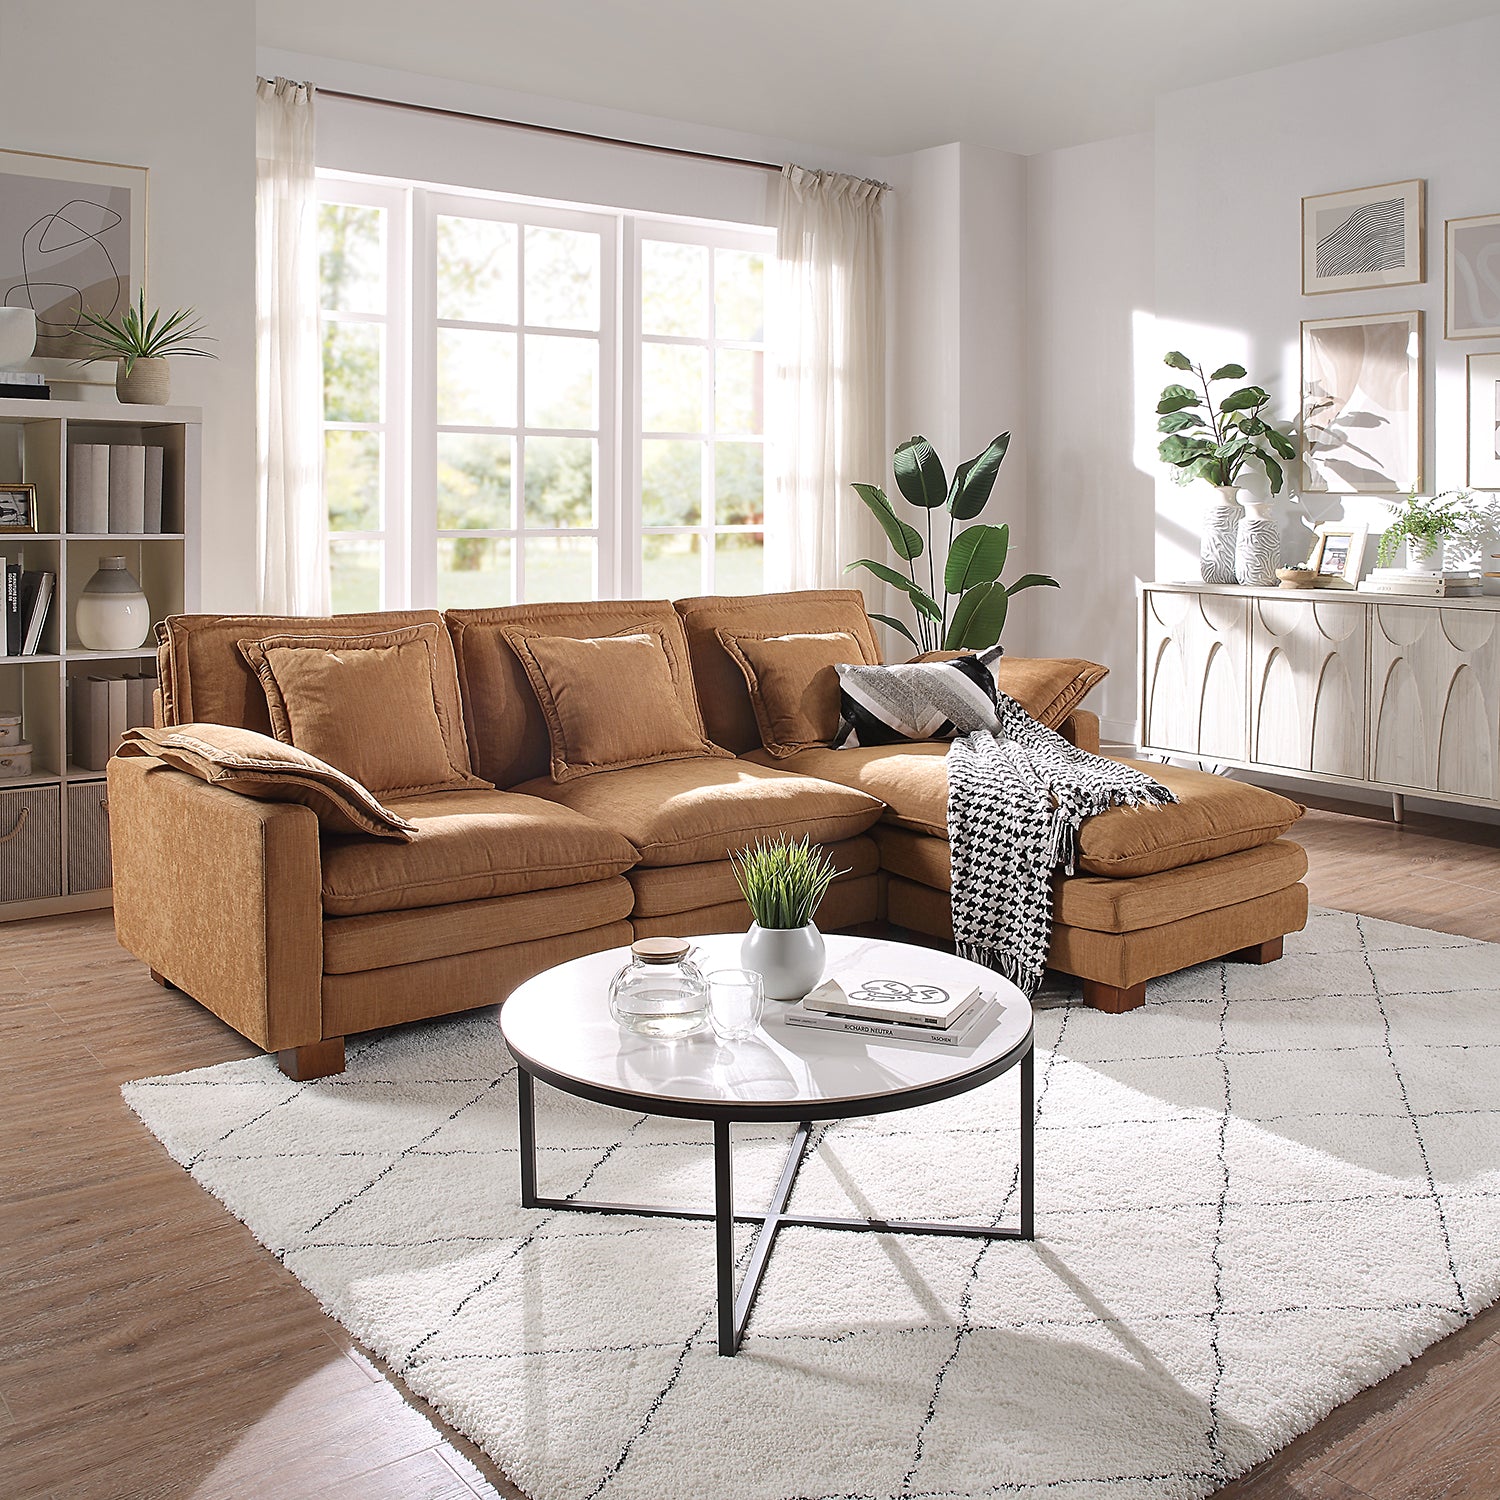 Stacked Tan Linen 4-Seat Corner Sectional